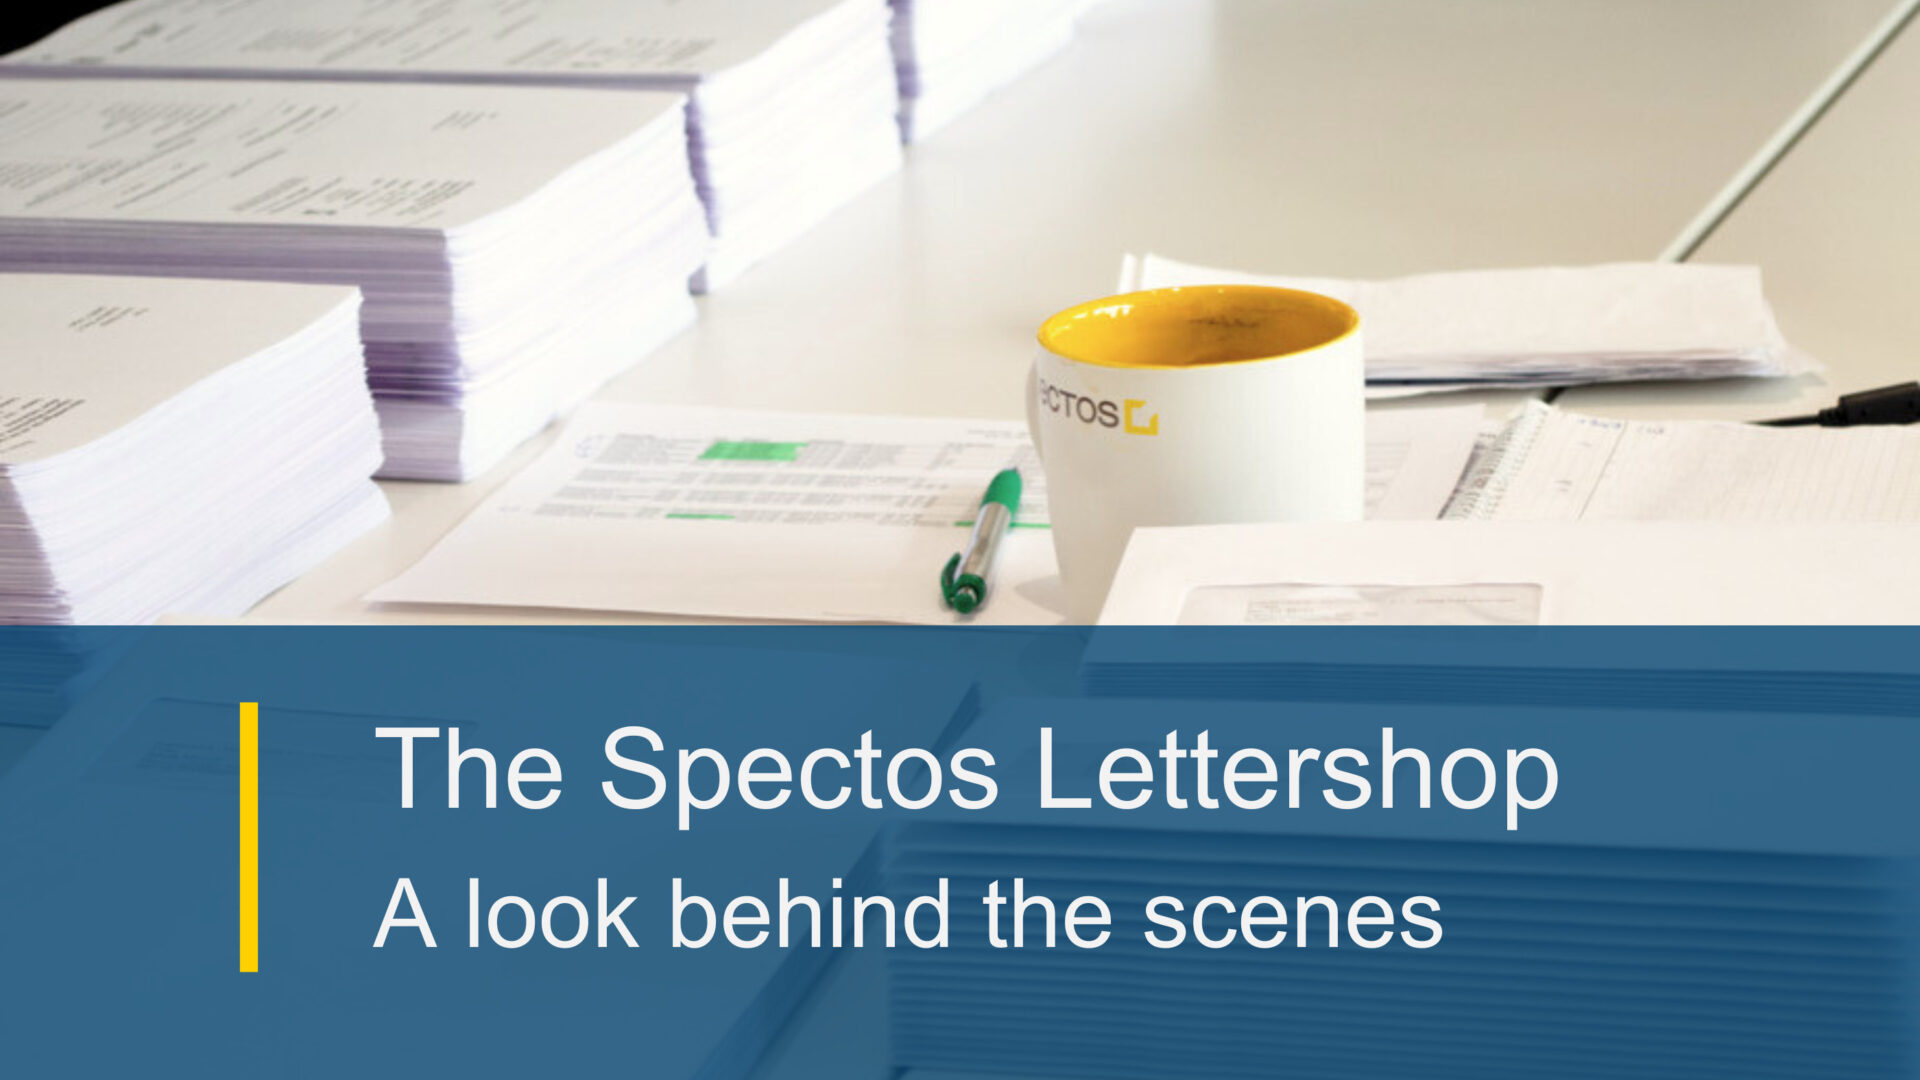 The Spectos Lettershop: A look behind the scenes